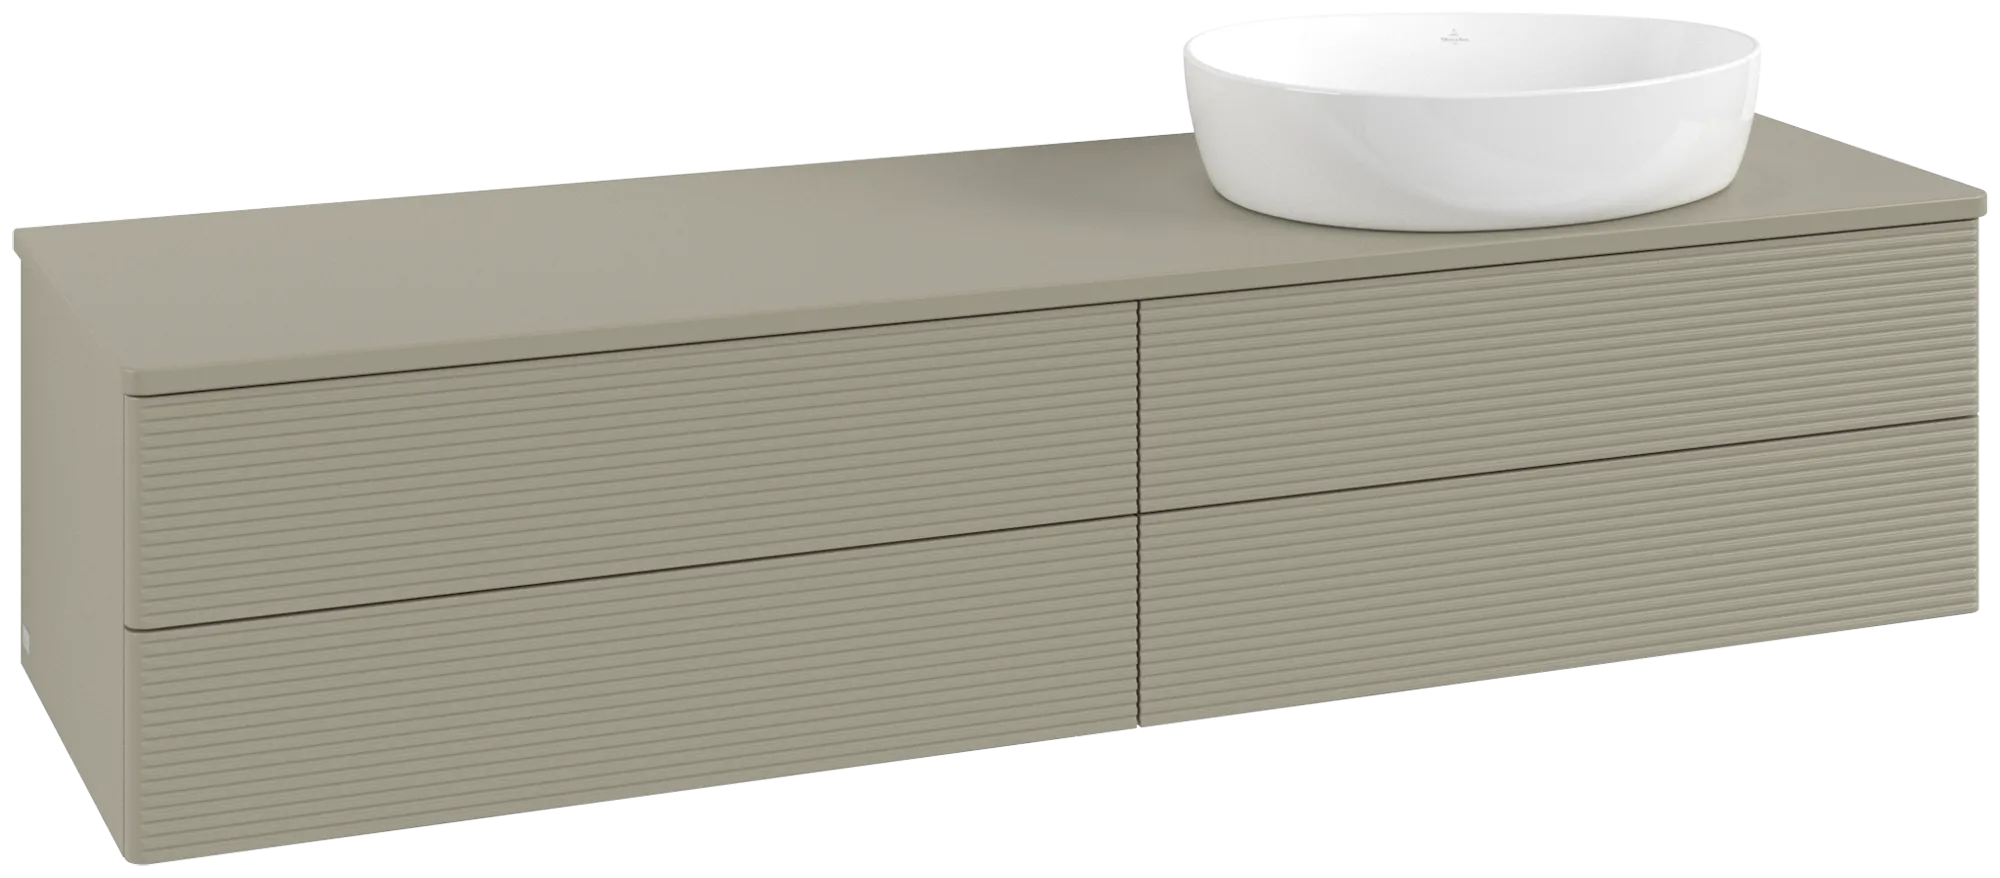 Picture of VILLEROY BOCH Antao Vanity unit, 4 pull-out compartments, 1600 x 360 x 500 mm, Front with grain texture, Stone Grey Matt Lacquer / Stone Grey Matt Lacquer #K27150HK